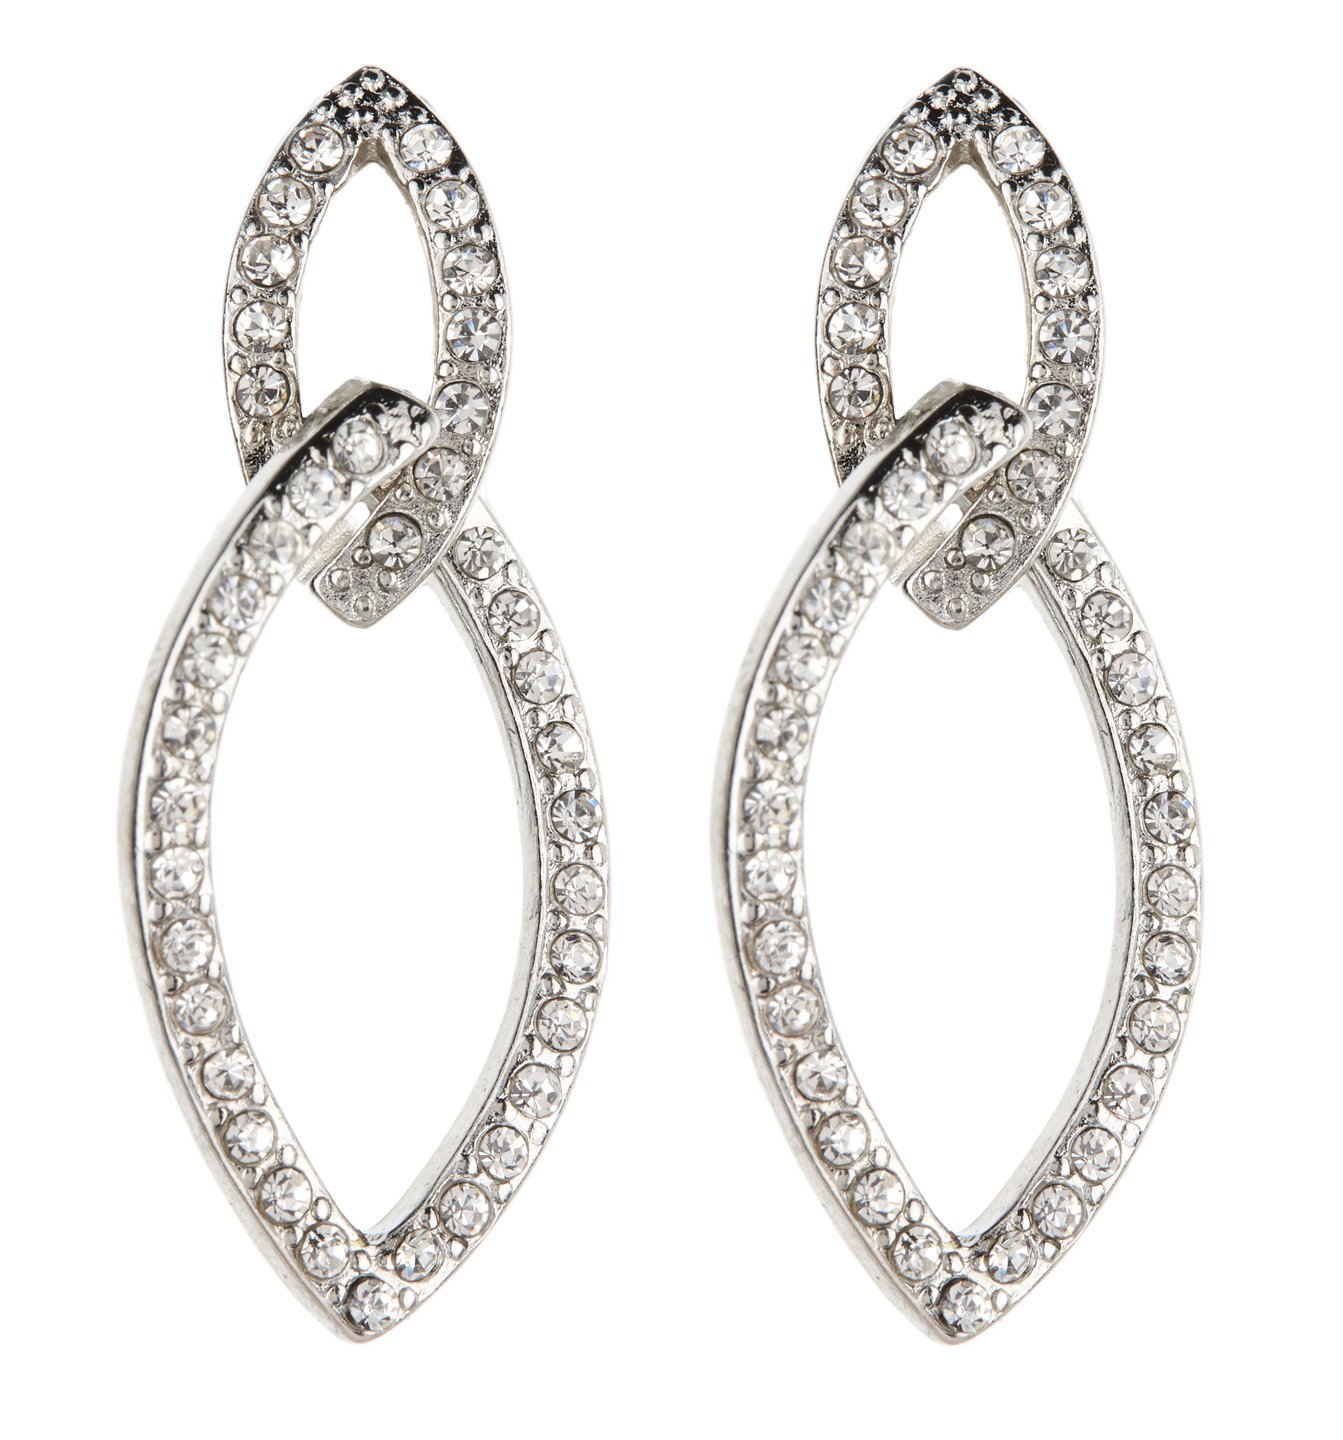 Clip On earrings - Cade - silver earring with clear crystals